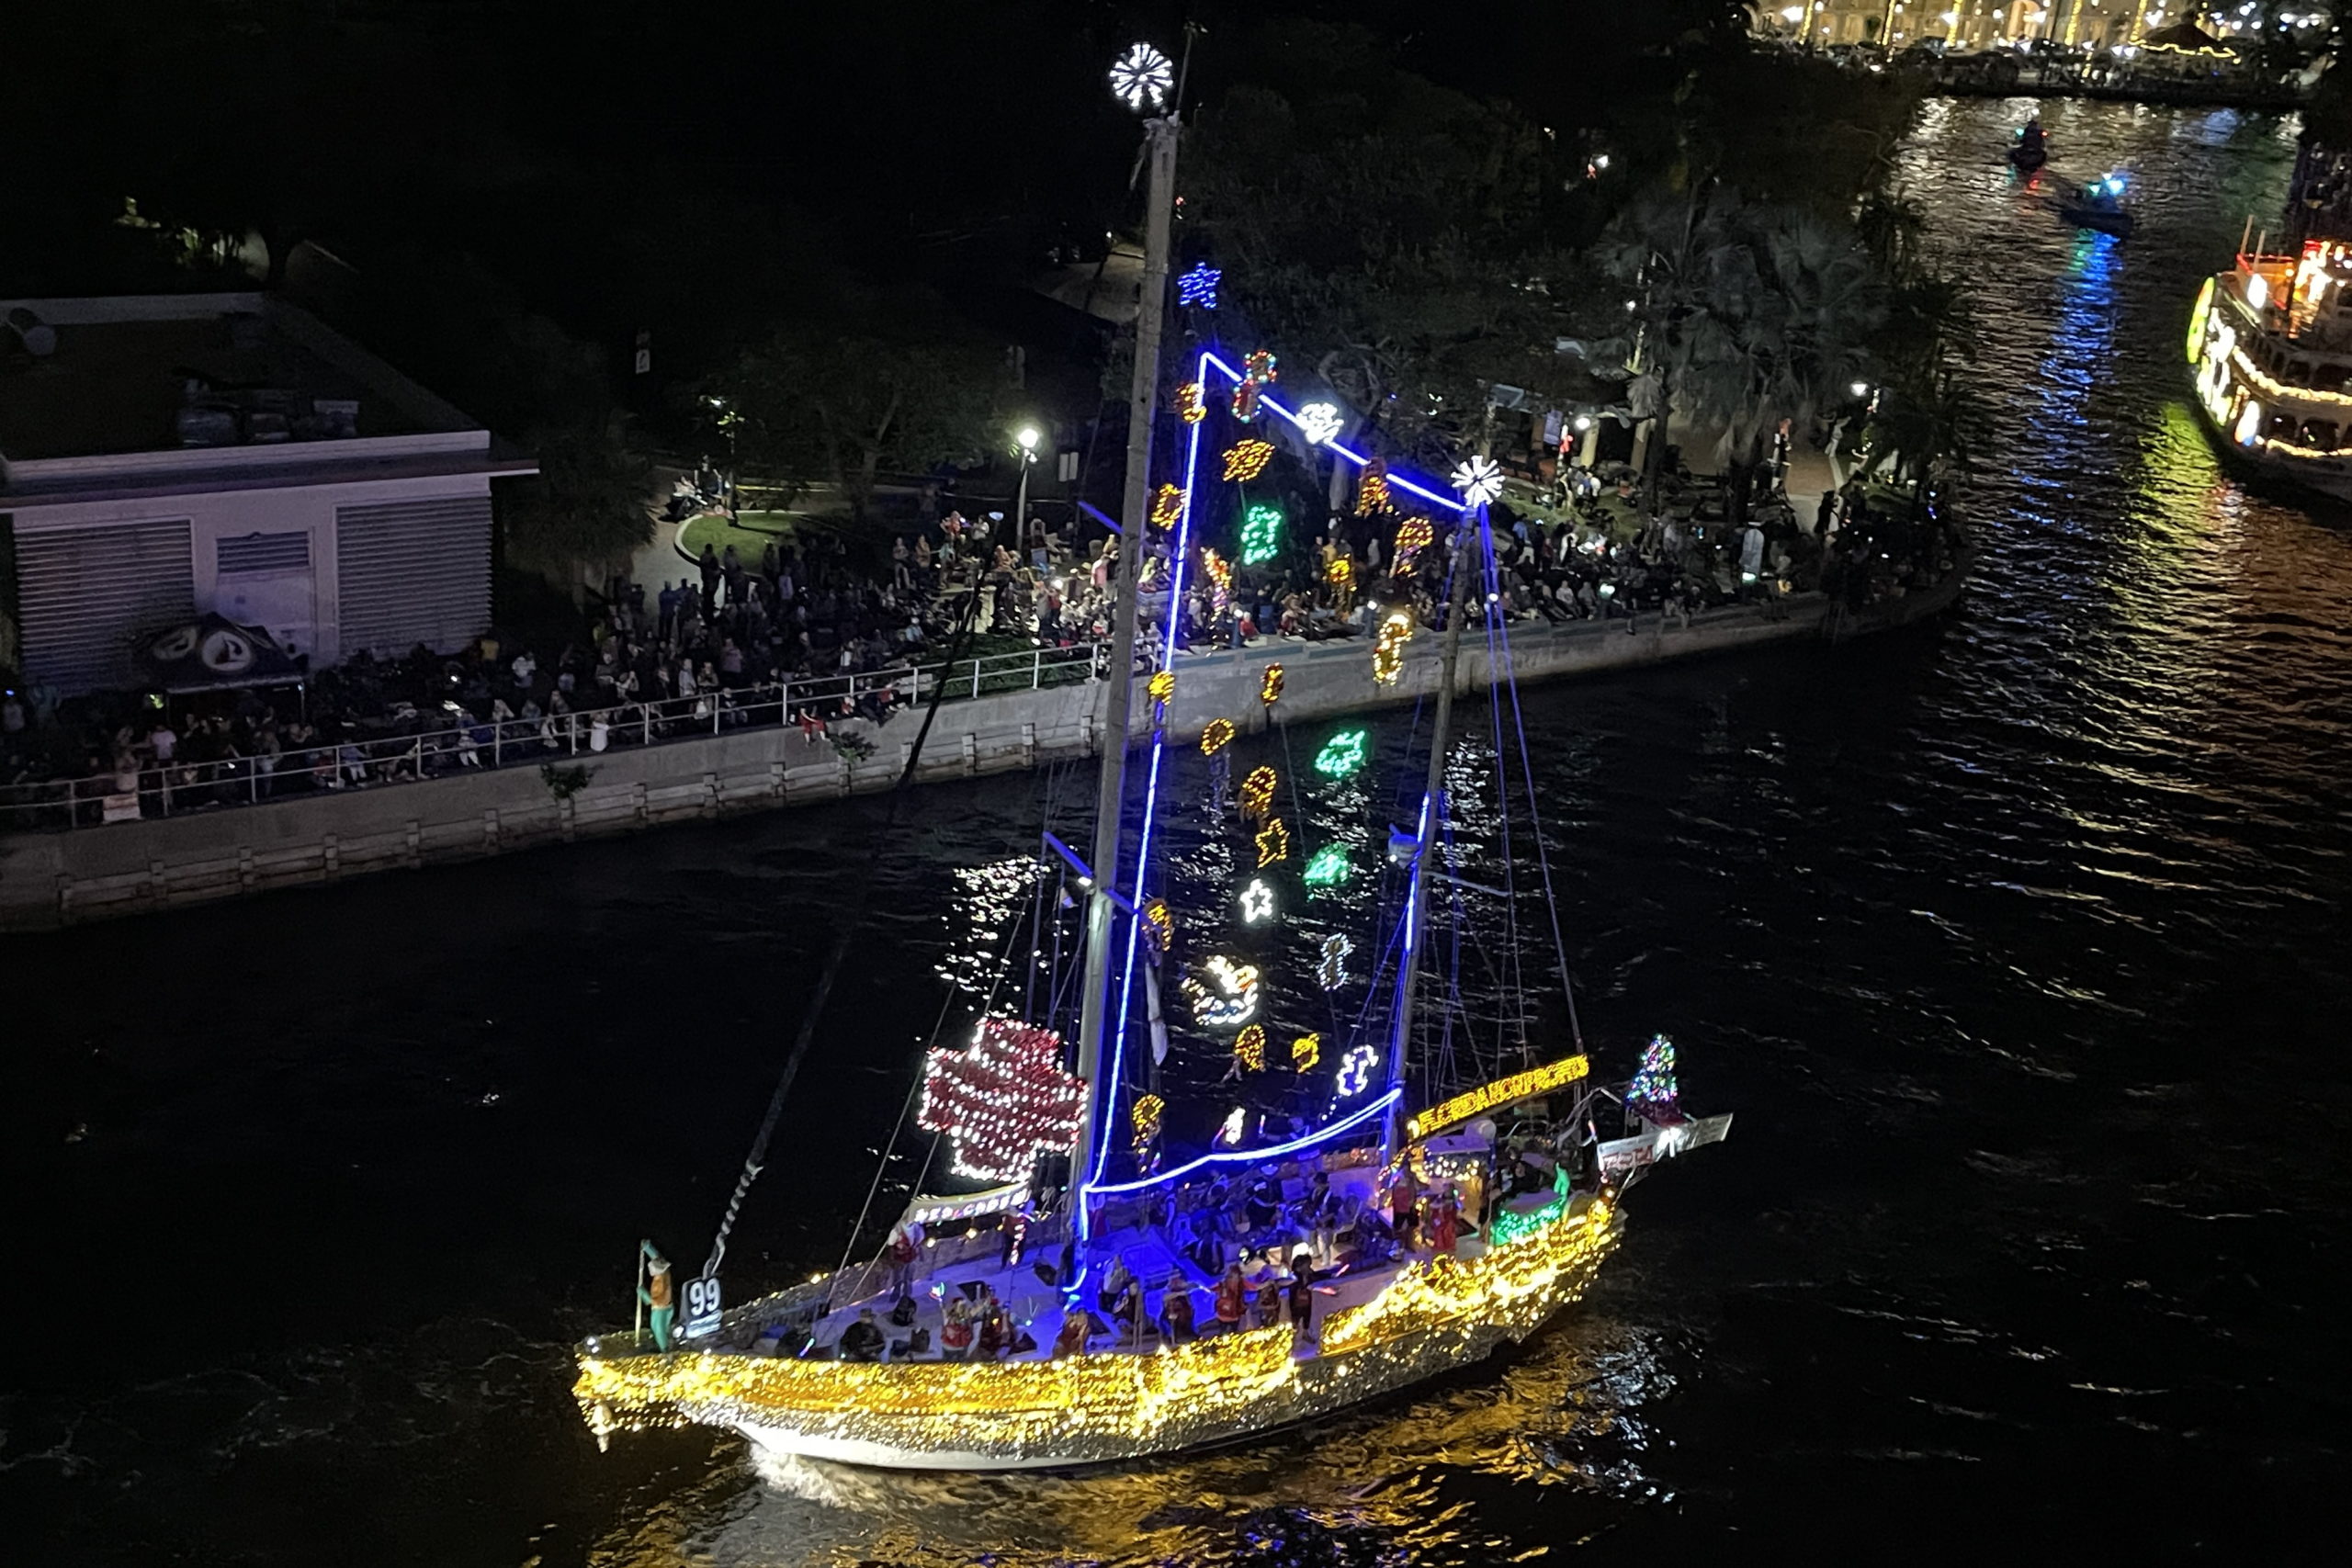 Unexpected Pleasure with The True Aquaman, boat number 99 in the 2022 Winterfest Boat Parade